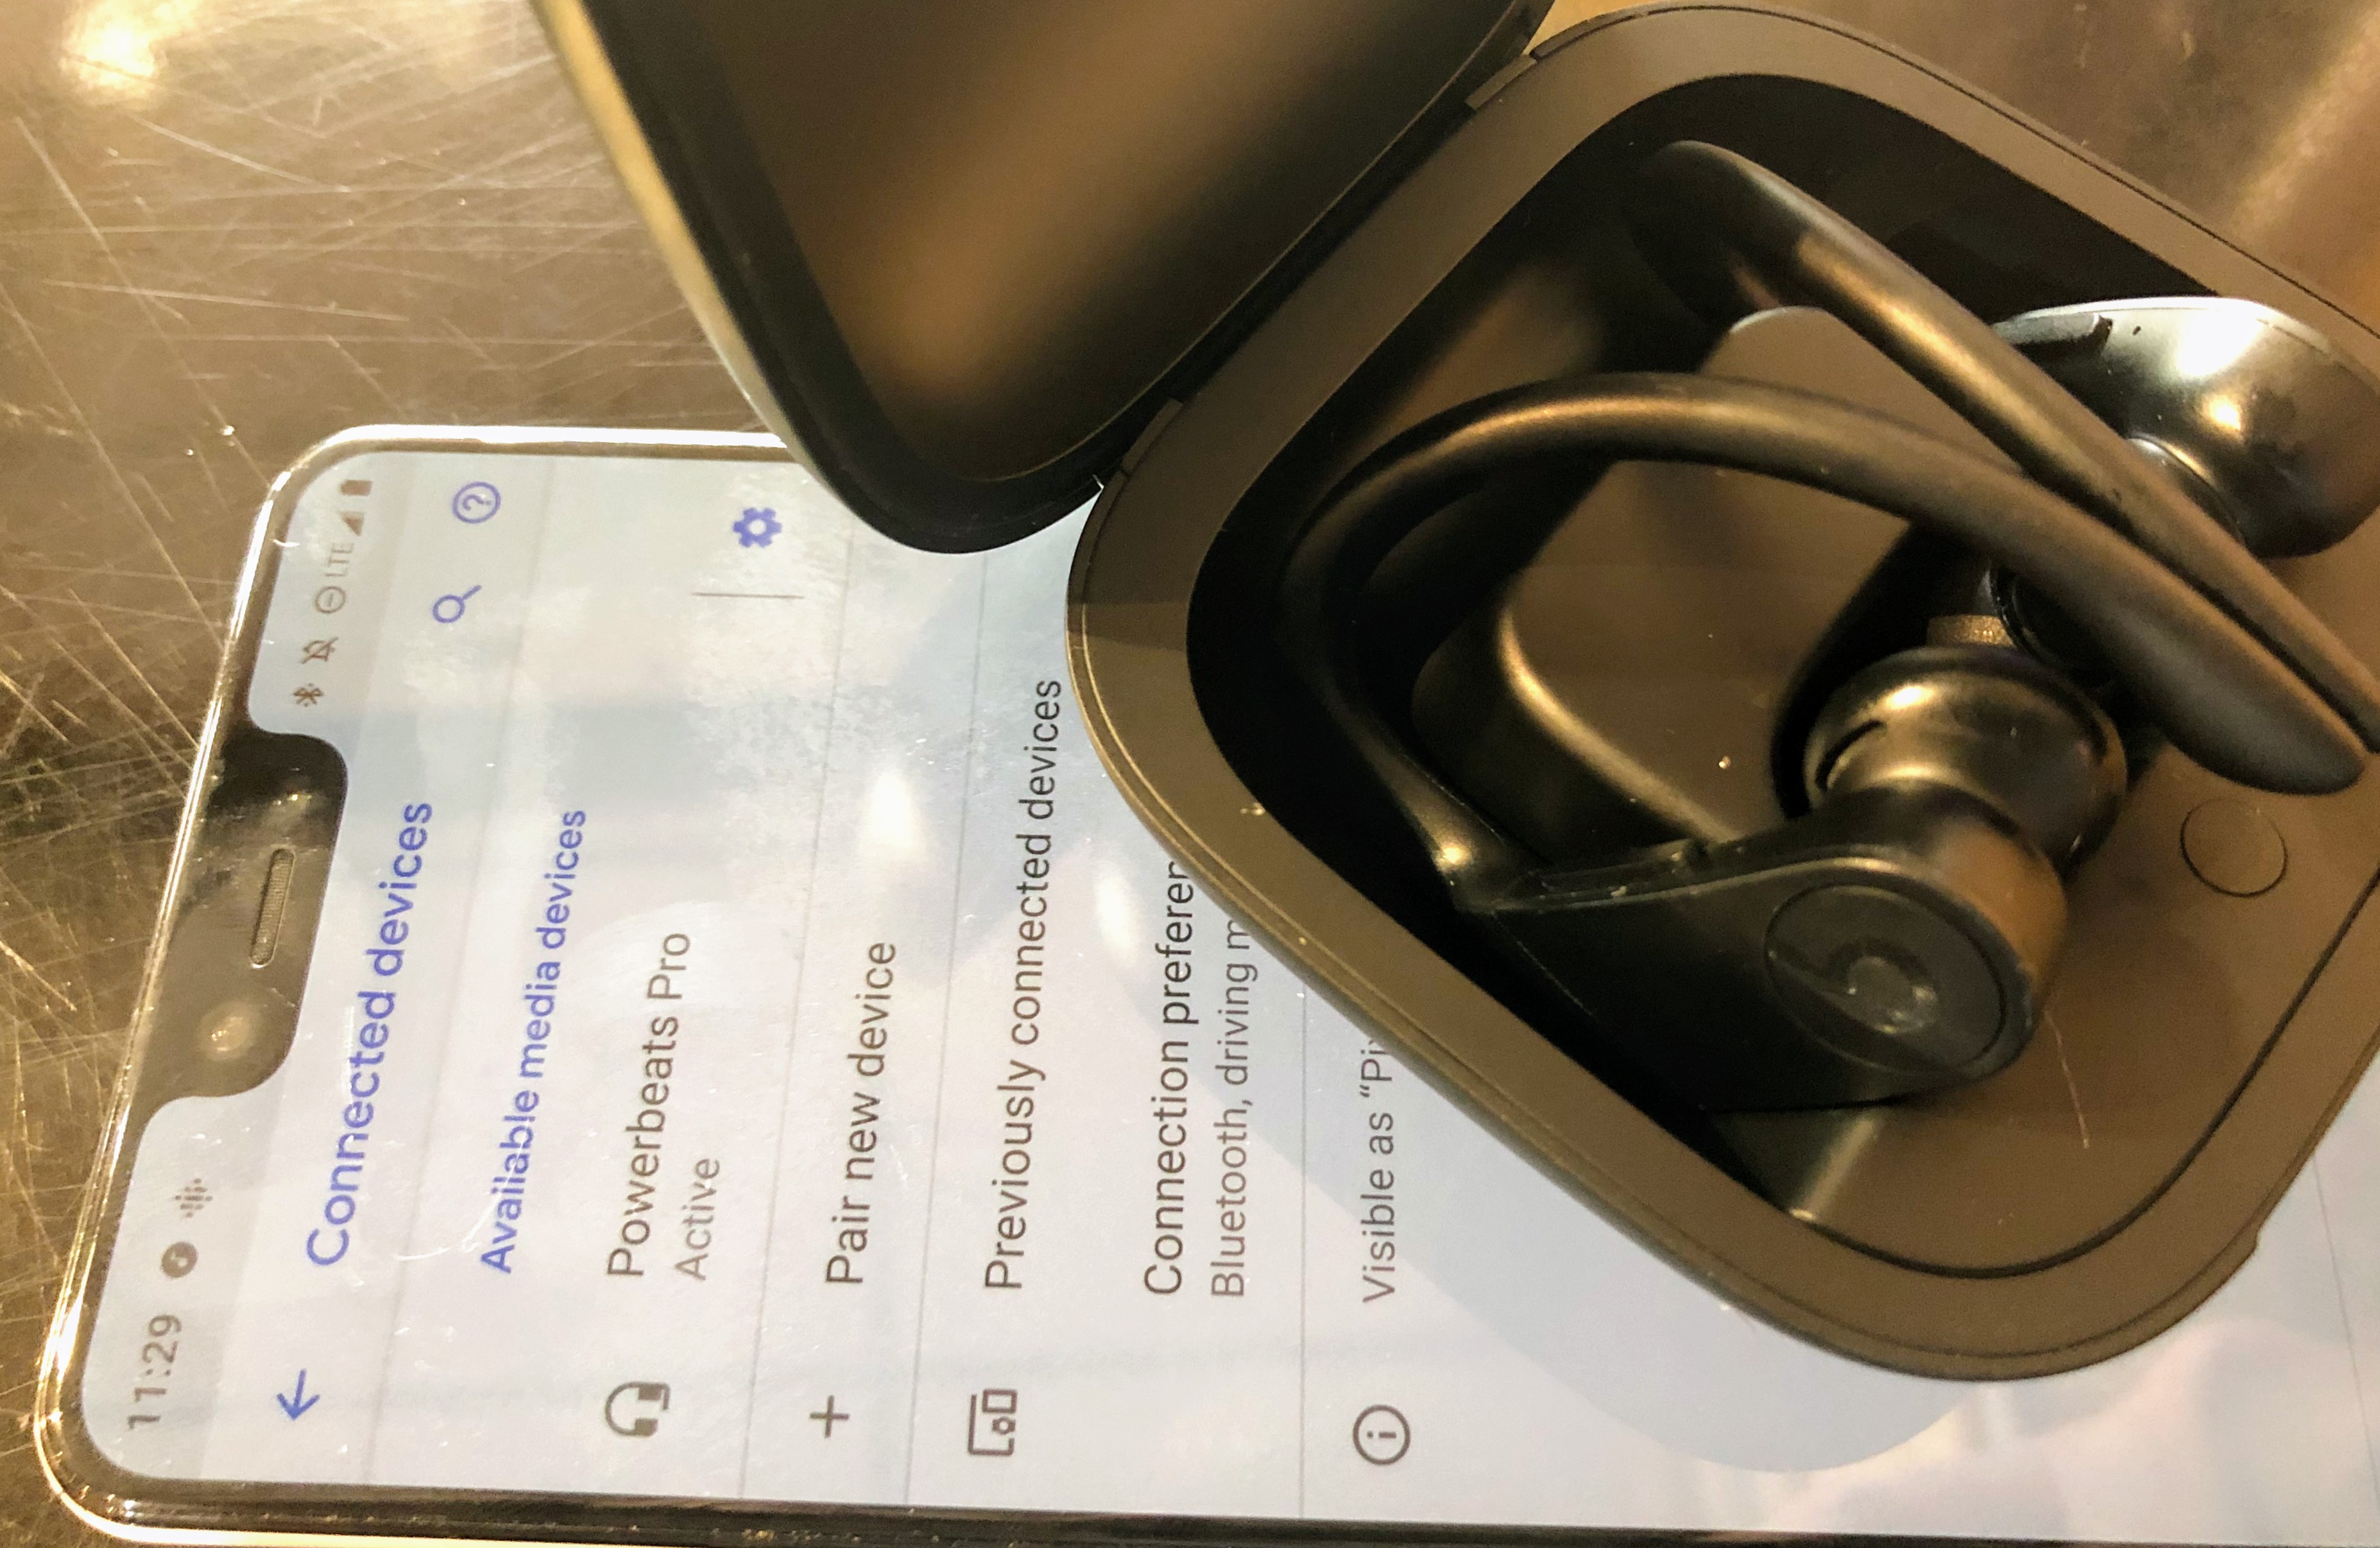 do the powerbeats pro work with android